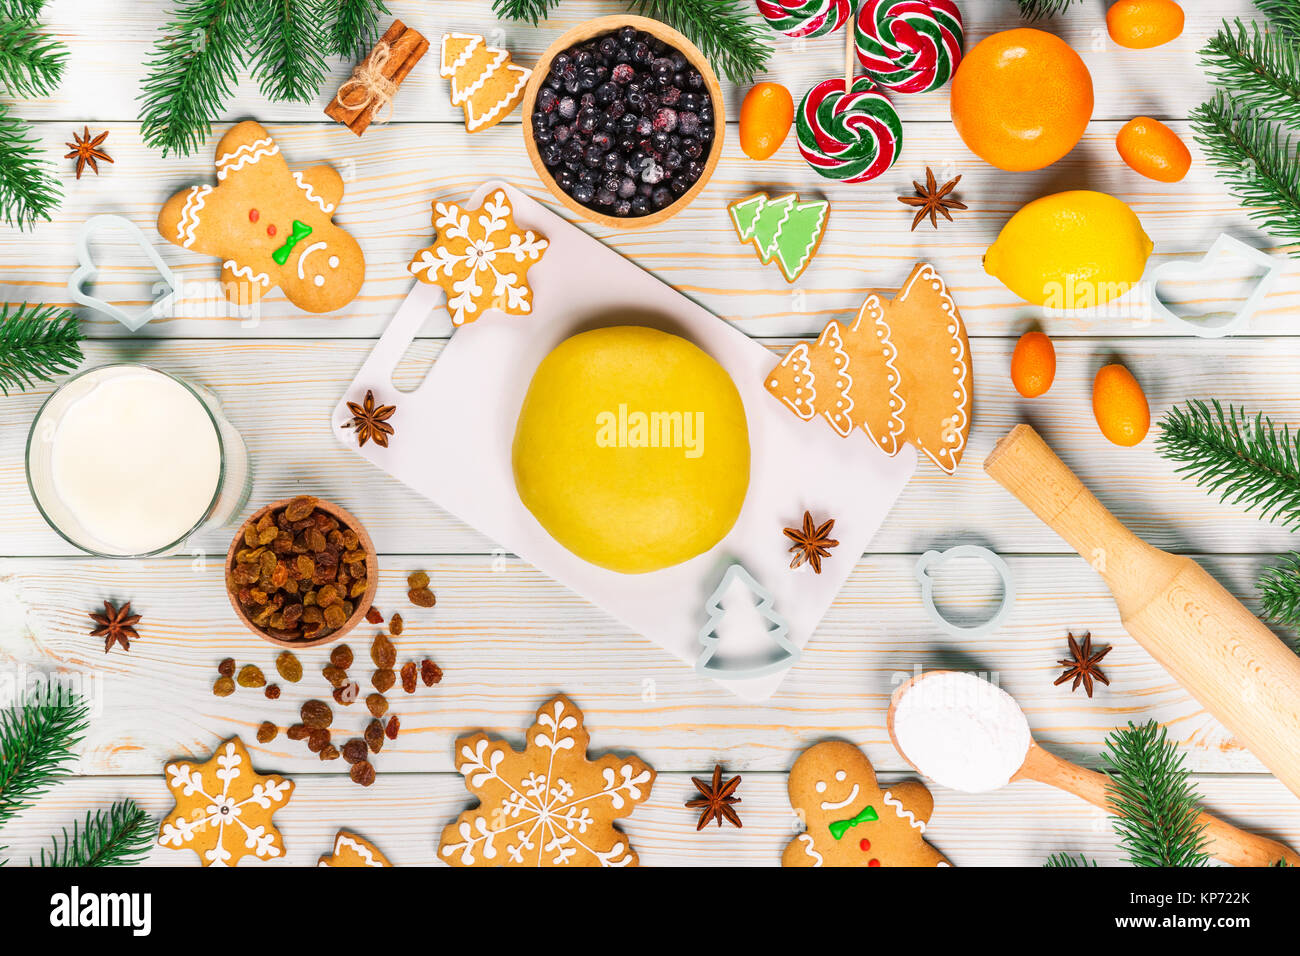 Cooking Christmas gingerbread cookies with the ingredients, dough, candy and winter spices decorating for new year celebration on white wooden table.  Stock Photo